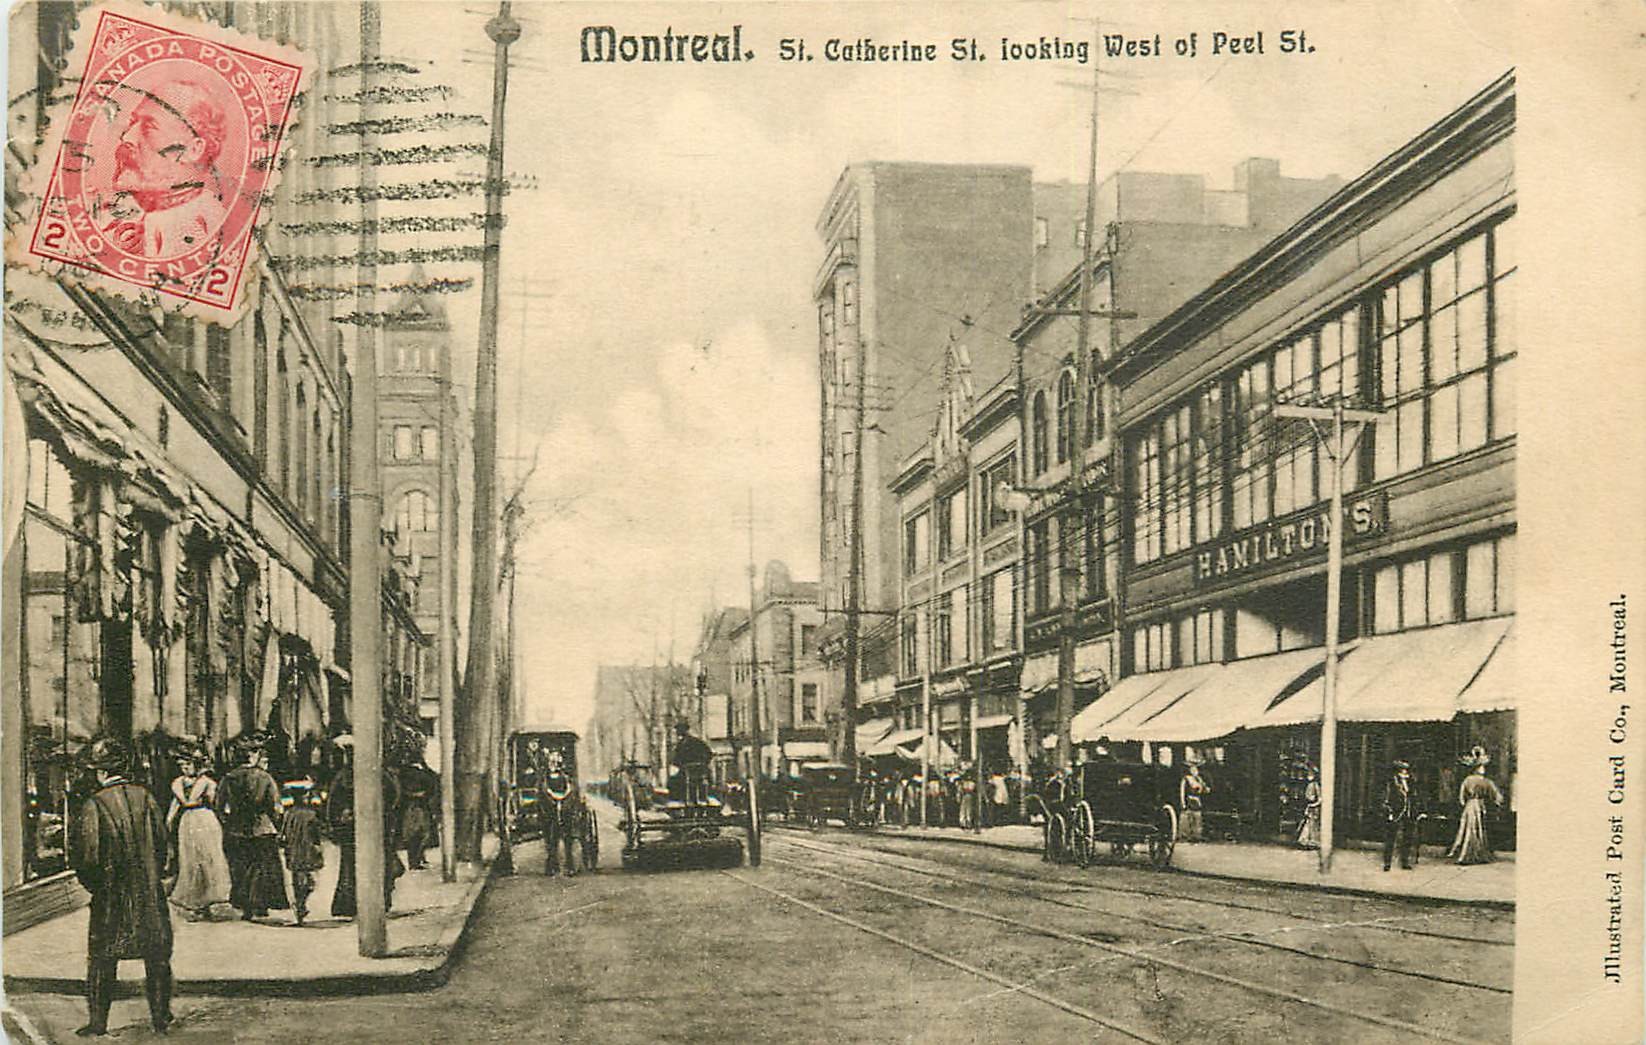 WW MONTREAL. St. Catherine St. looking West of Peel St.